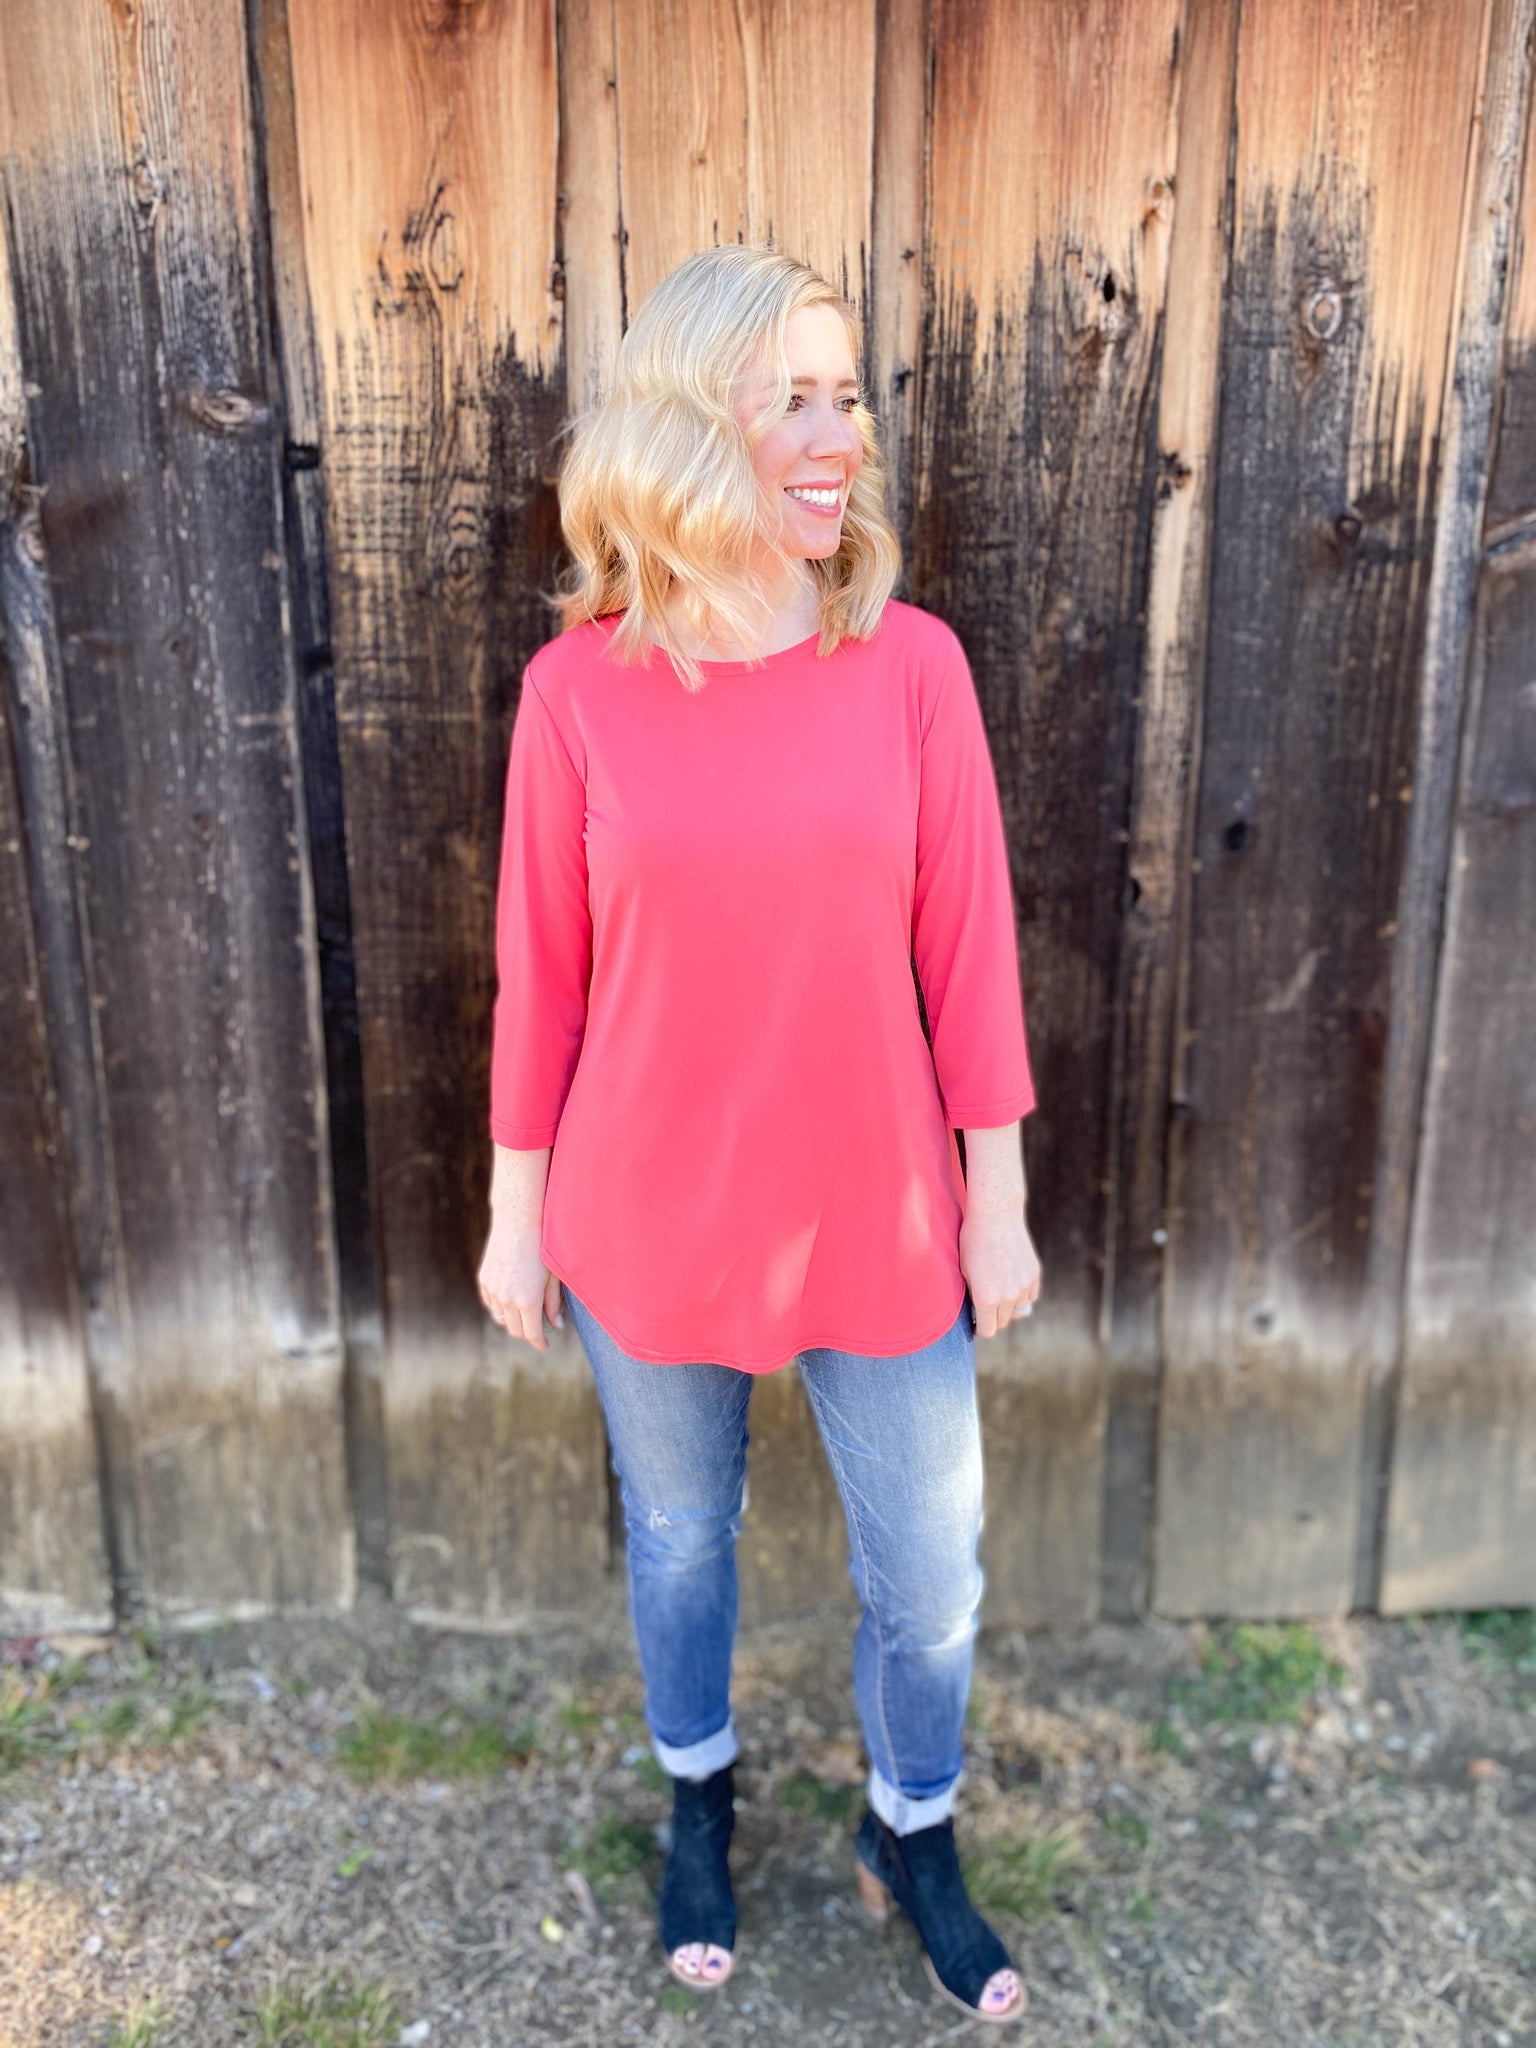 Allison Coral 3/4 Sleeve Solid Top - Ribbons and Spice Boutique